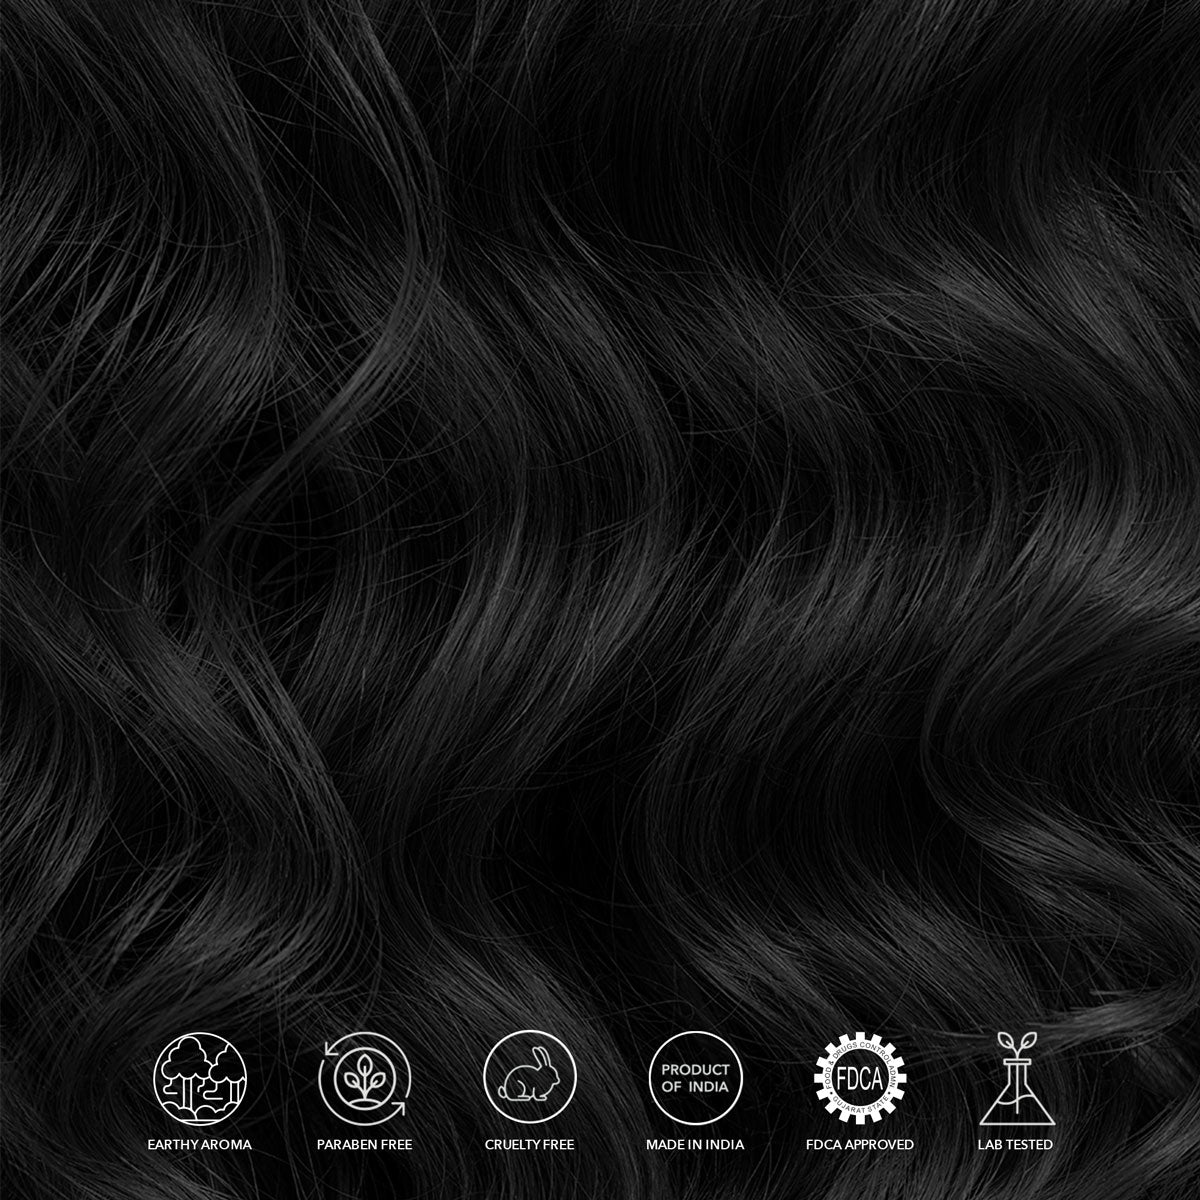 Onyx Black Jewel Collection Semi Permanent Hair Color